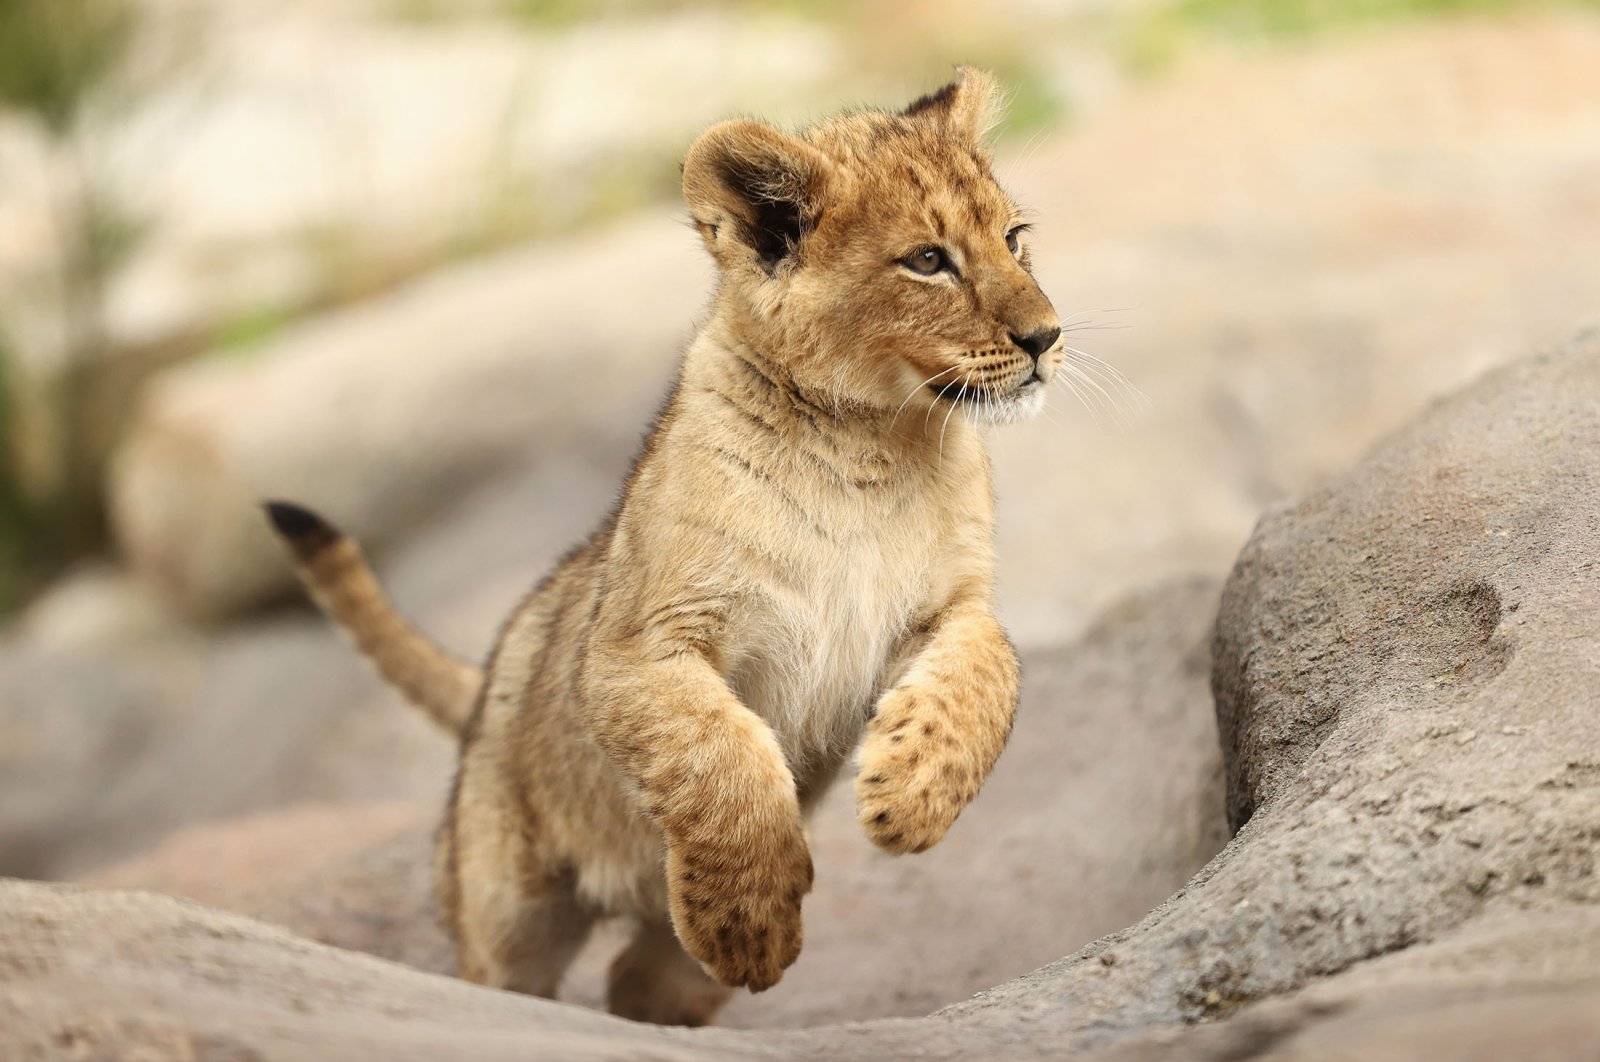 Photoshoot of the cute kind: Lion cubs make debut in Australian Zoo